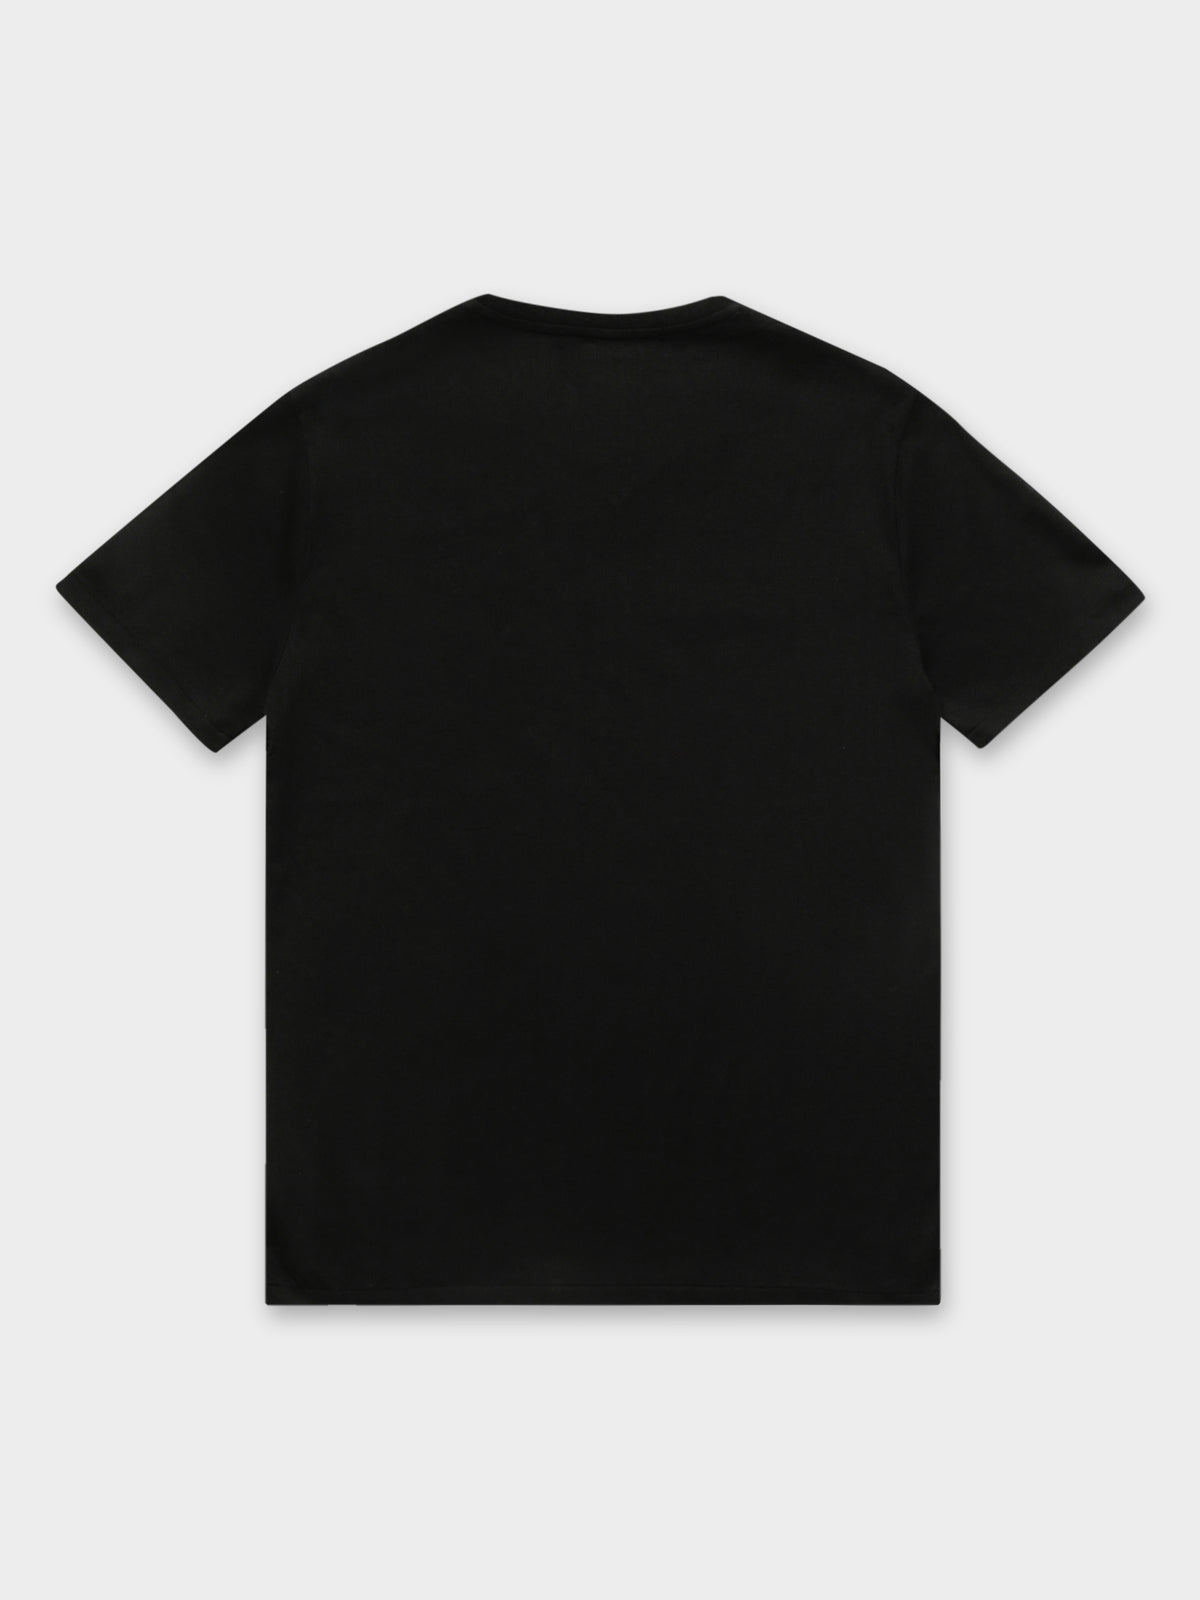 Centre Pony T-Shirt in Black